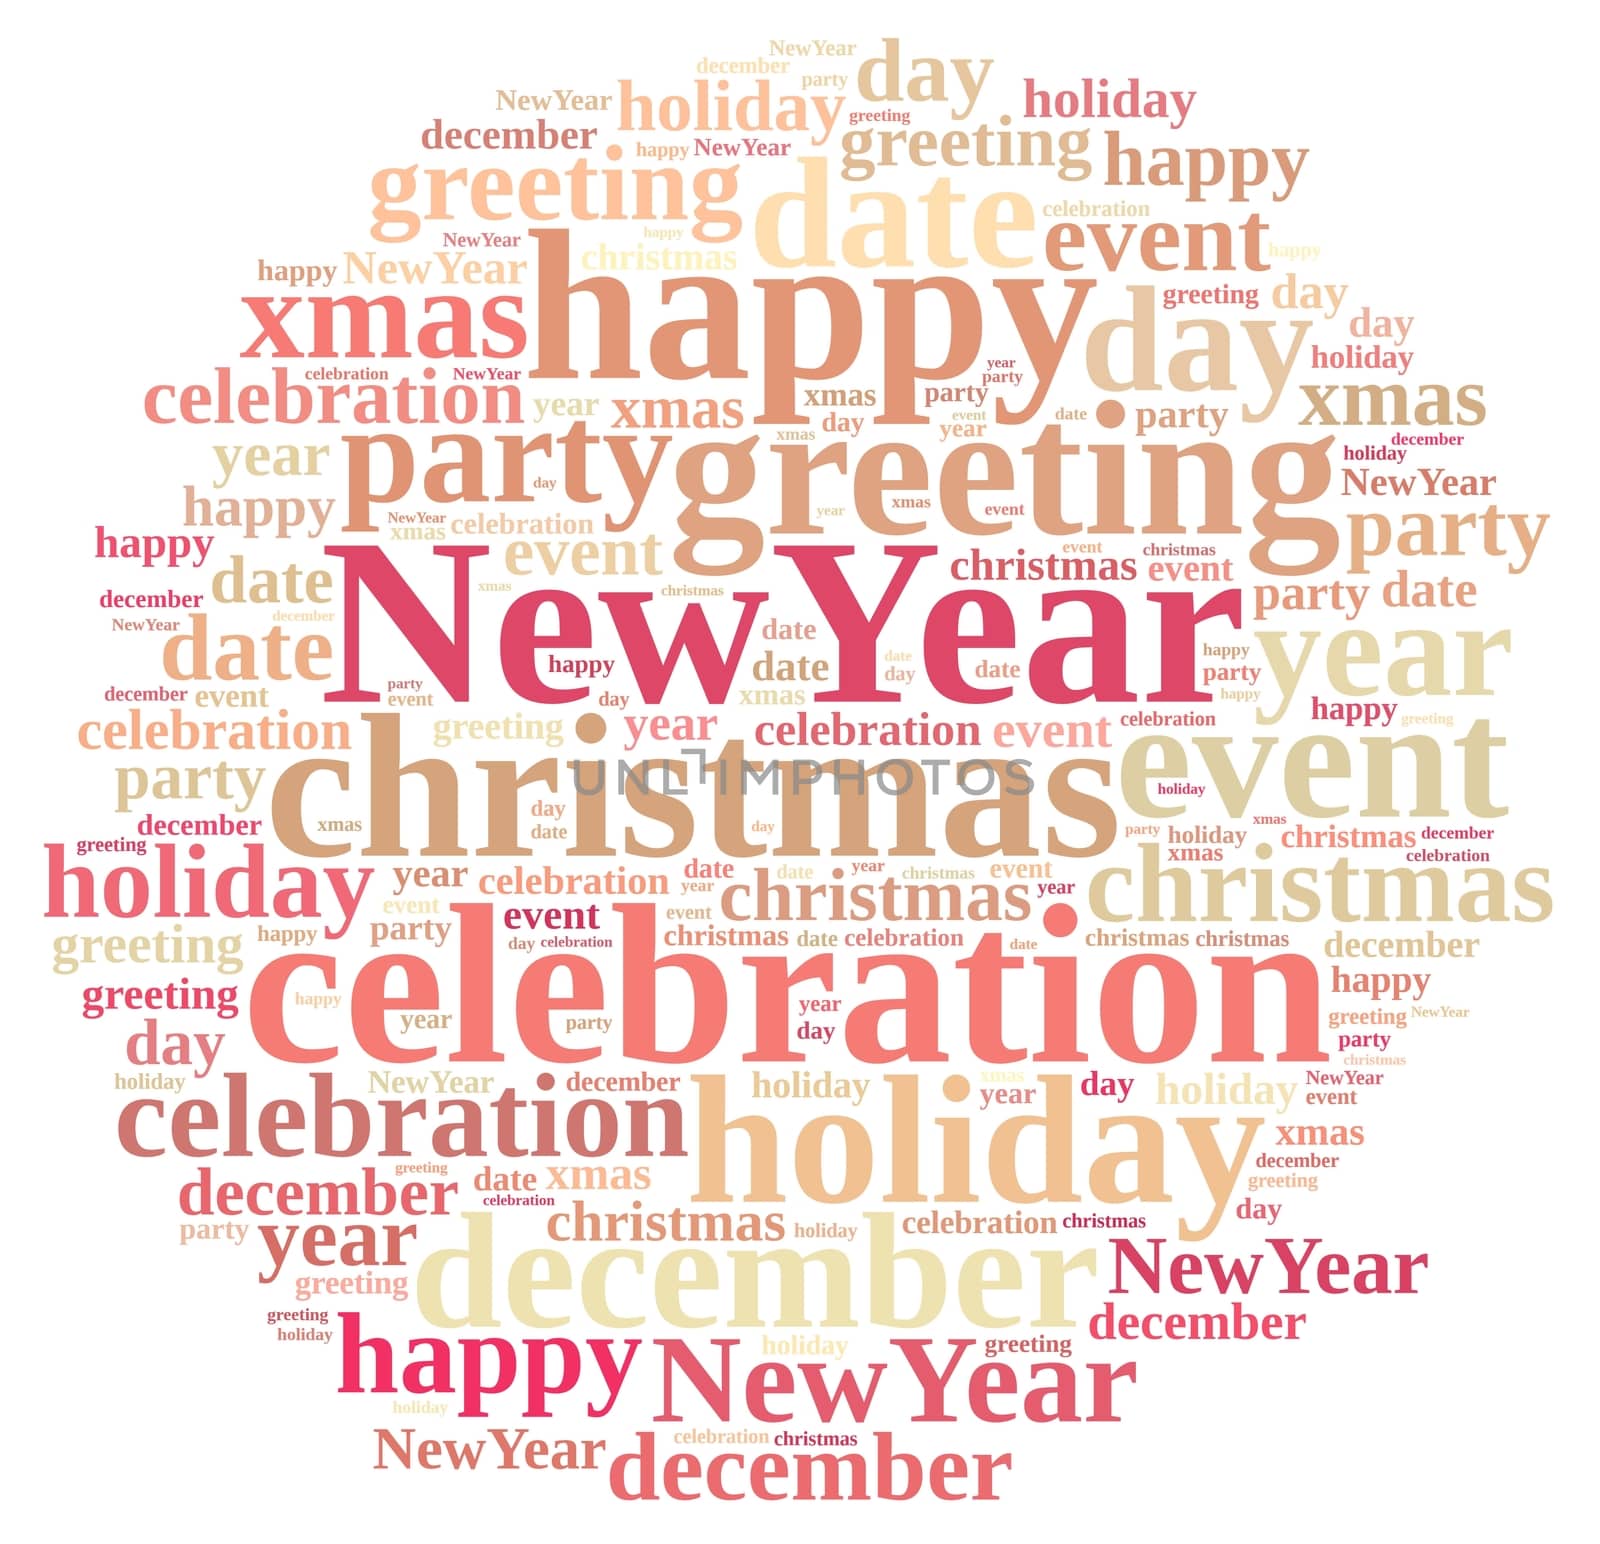 Illustration with word cloud about the New Year.